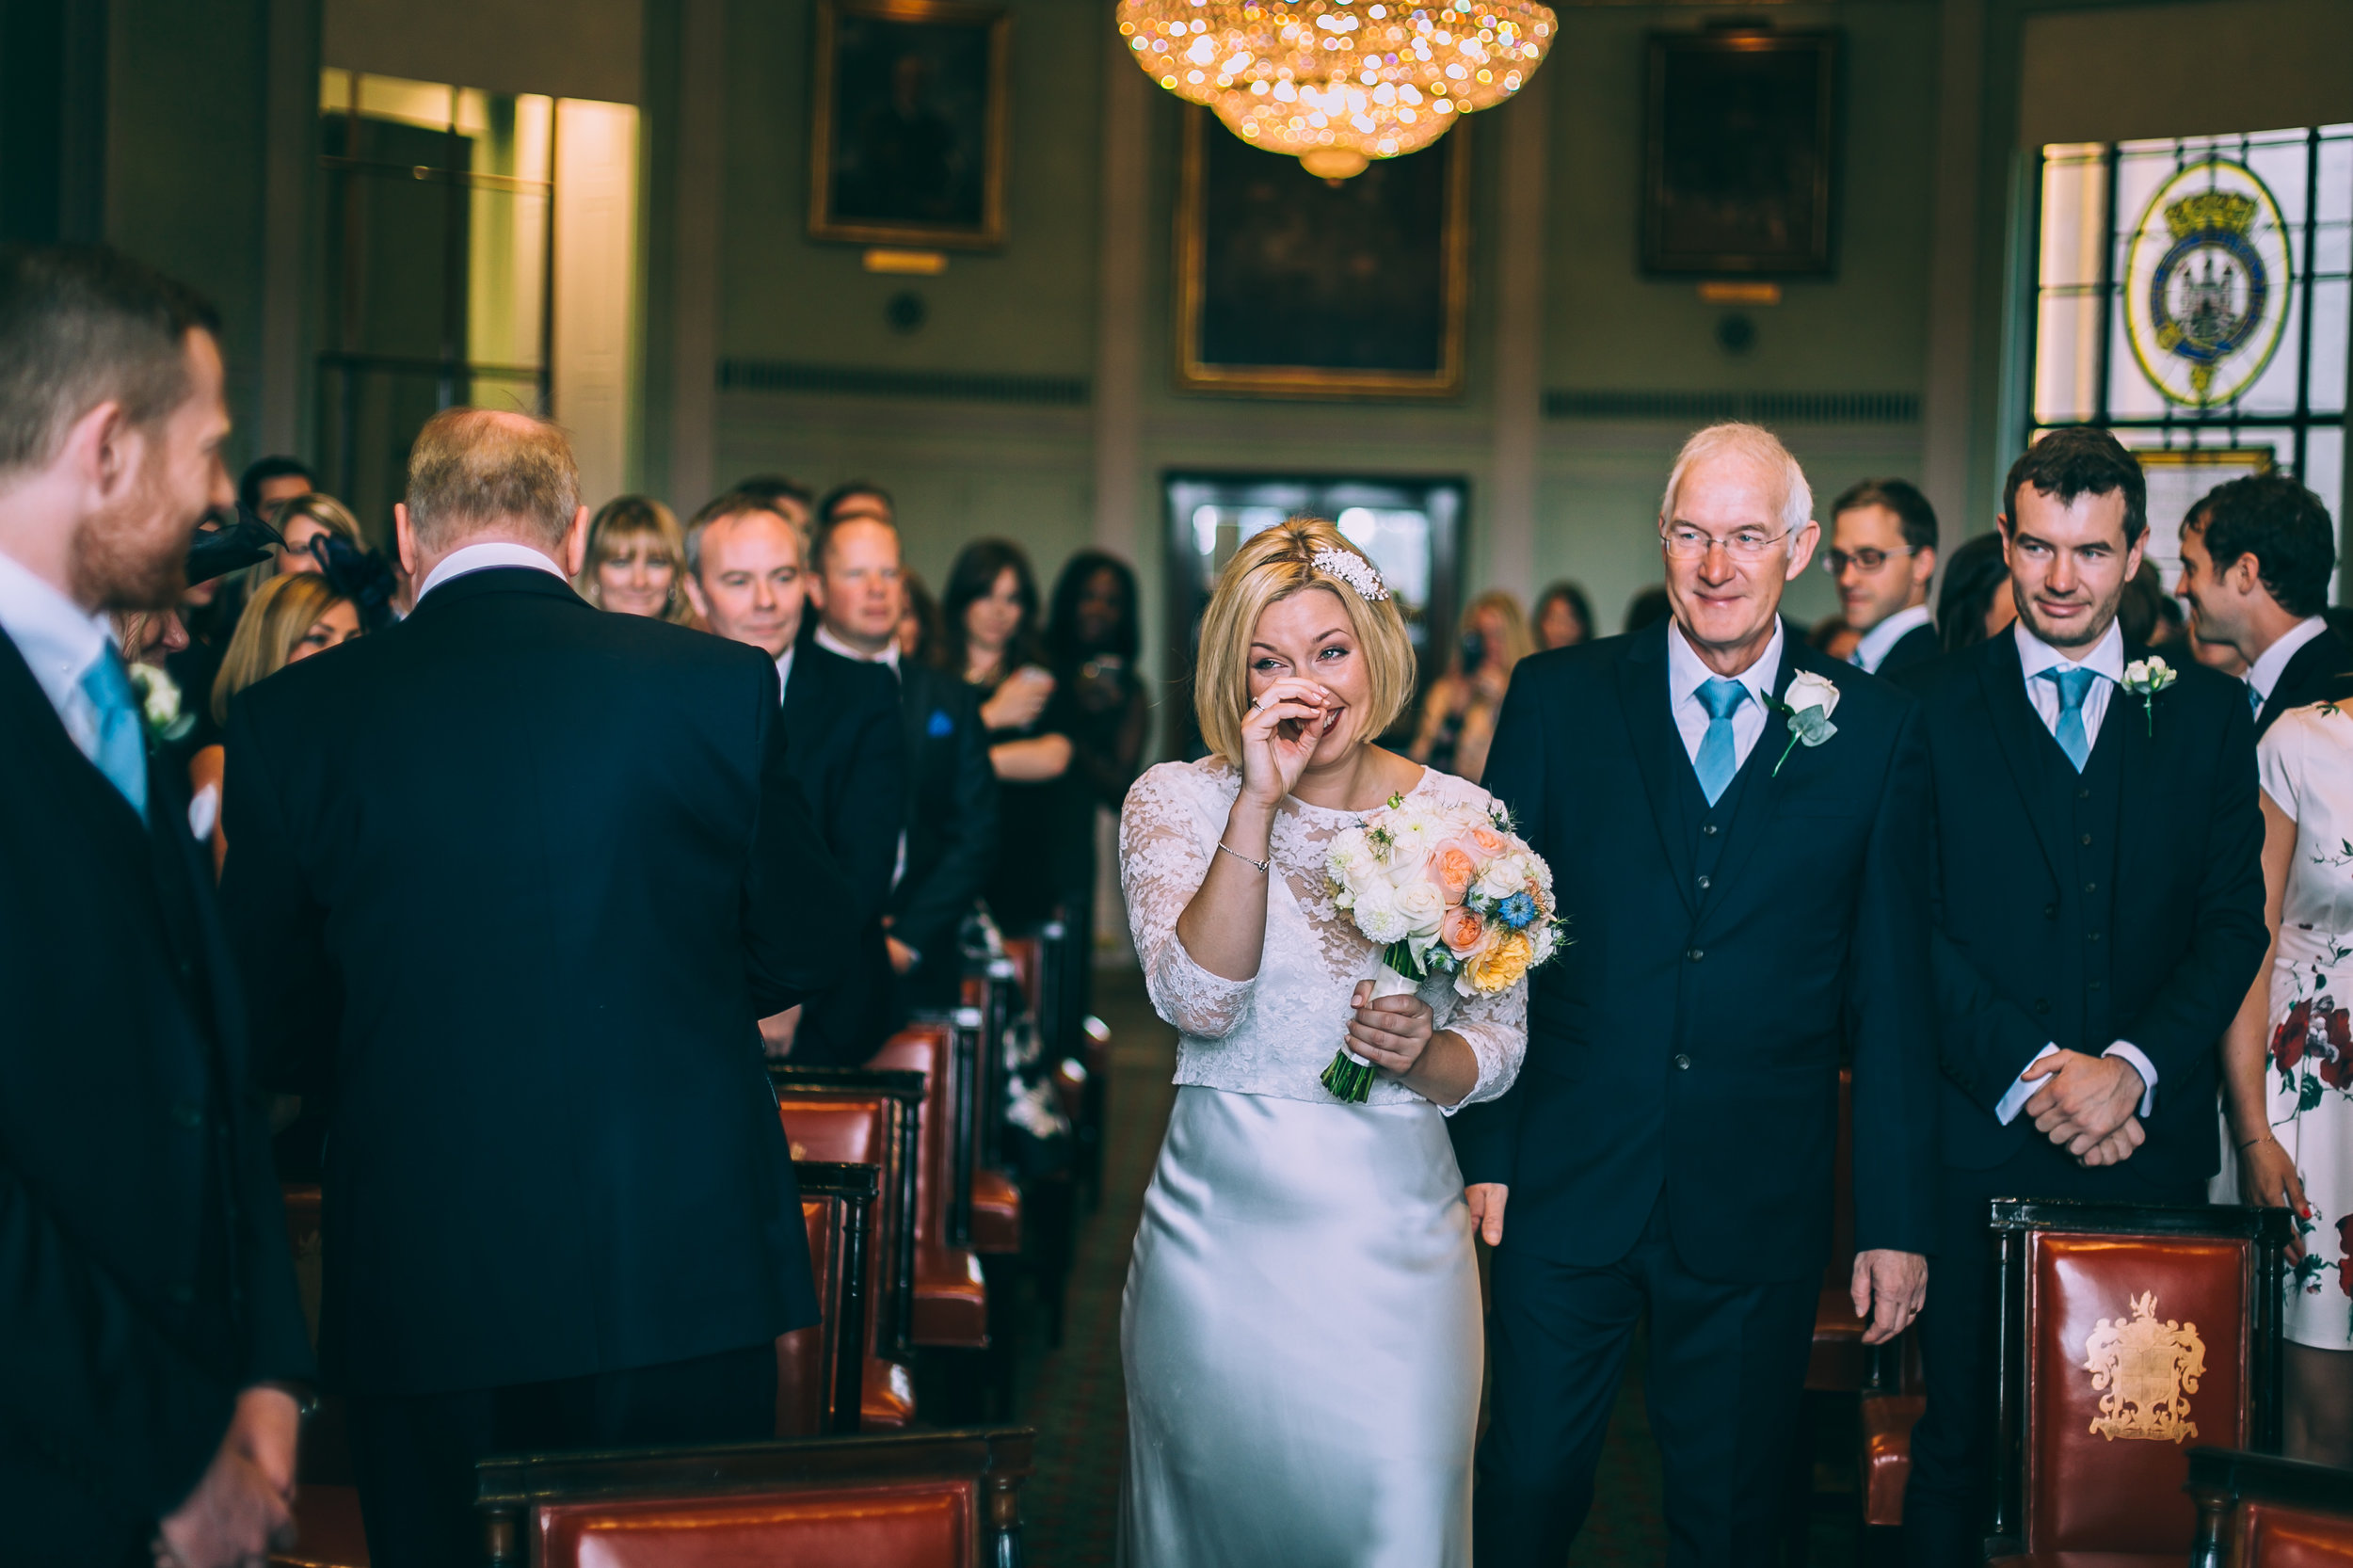 Alex and Ian-Wedding-at-Trinity House-Oyster Shed London-tom-biddle-photography - tb0008.jpg